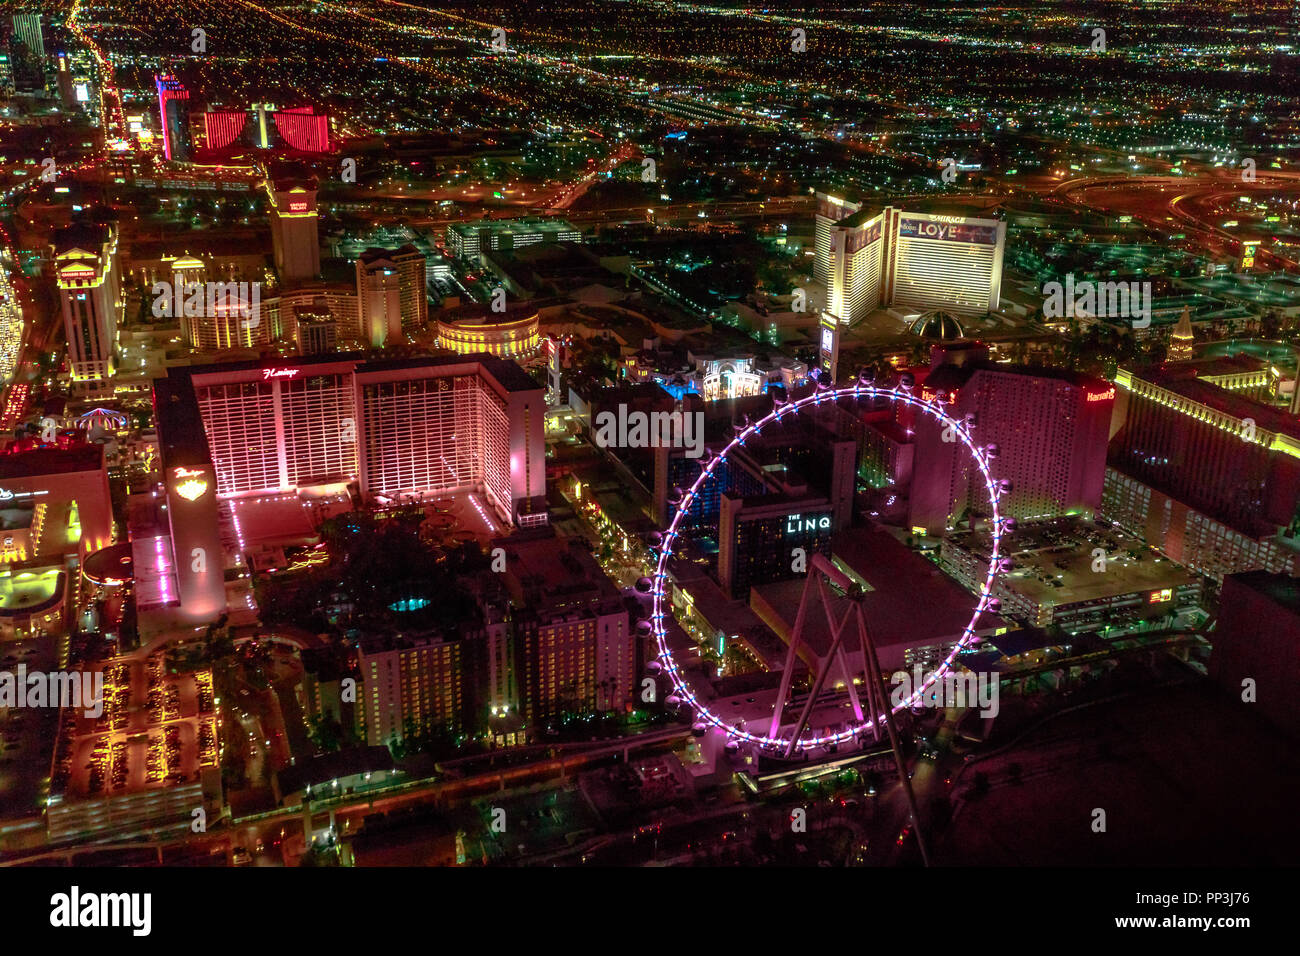 Las Vegas, Nevada, United States - August 18, 2018: aerial view of Las Vegas Strip Skyline illuminated by night. Scenic flight above: High Roller, The Linq, The Mirage and Flamingo Casino and Hotel. Stock Photo